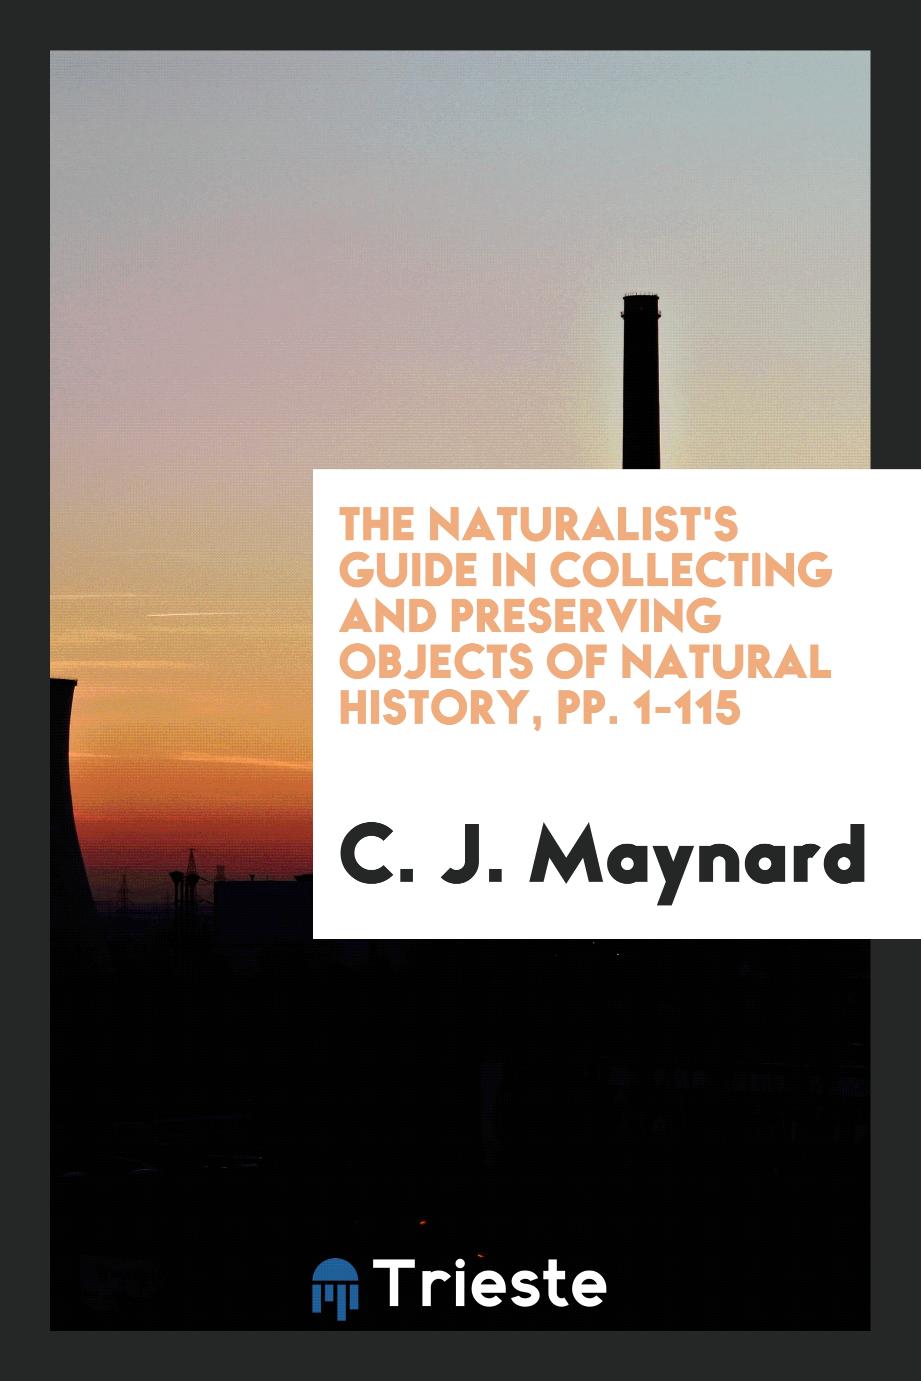 The Naturalist's Guide in Collecting and Preserving Objects of Natural History, pp. 1-115